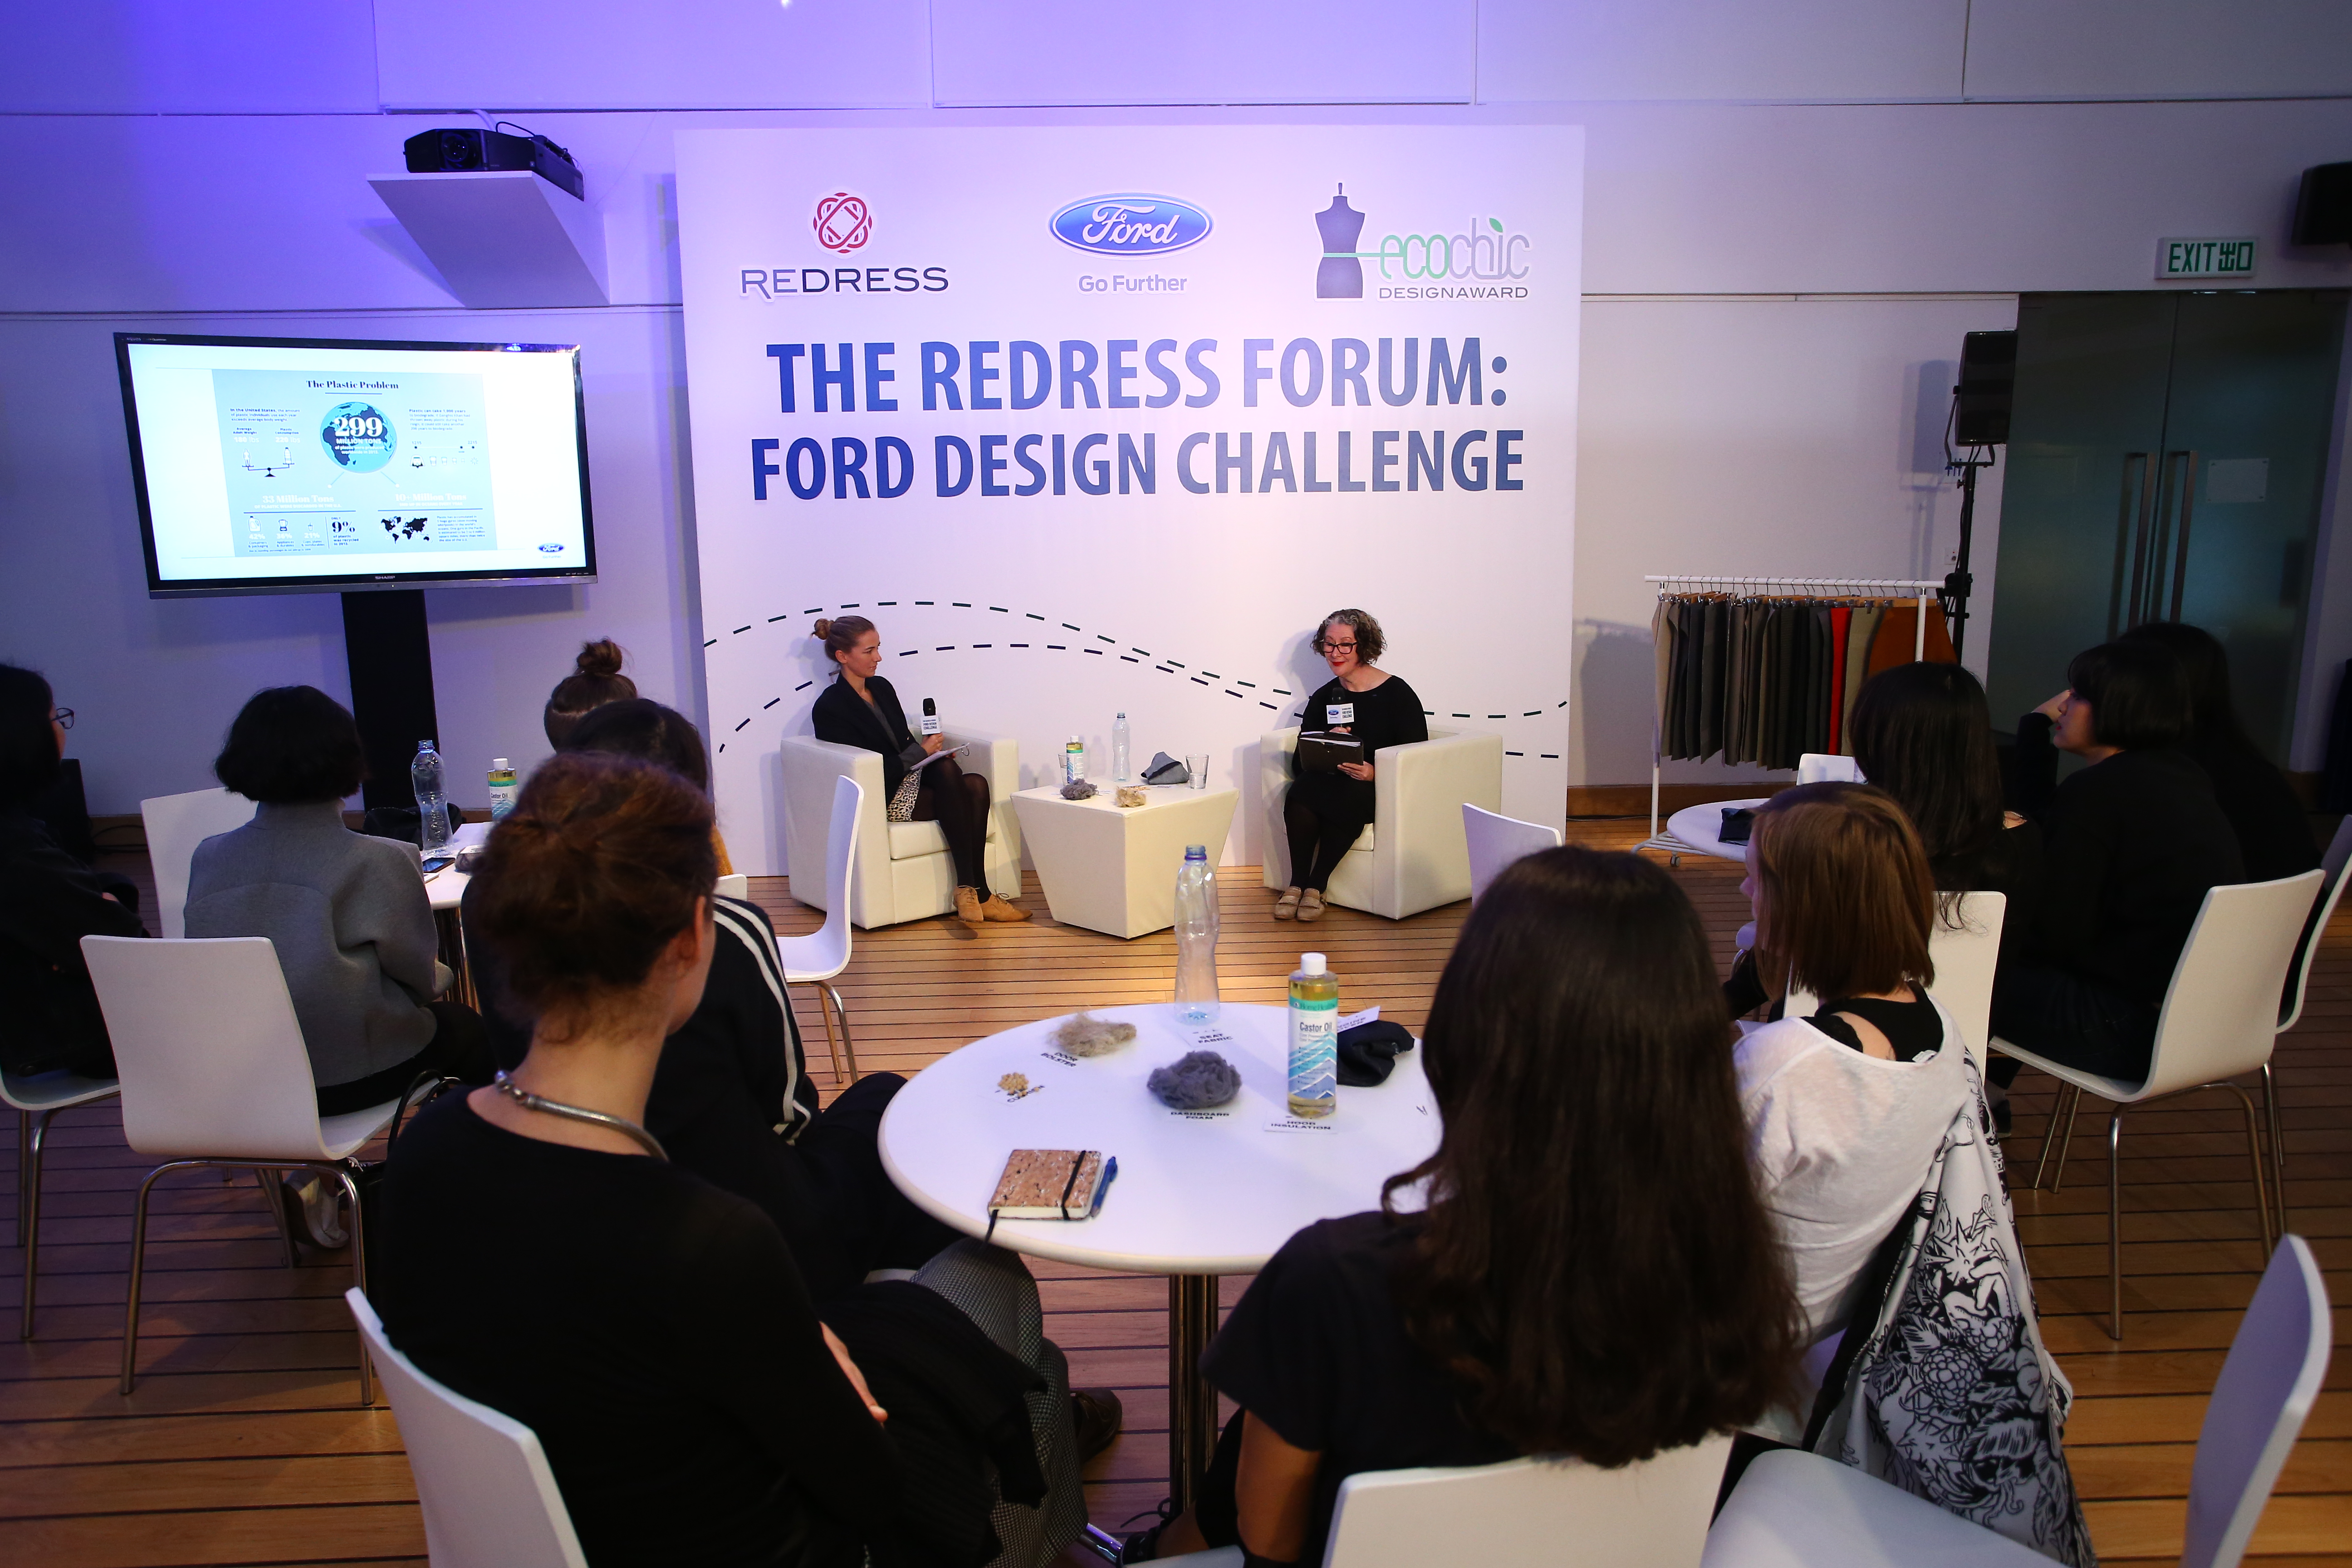 Marie Smyth, Senior Designer - Colour and Materials Design, Ford Asia Pacific and Christina Dean - Founder and CEO in an interative session with designers